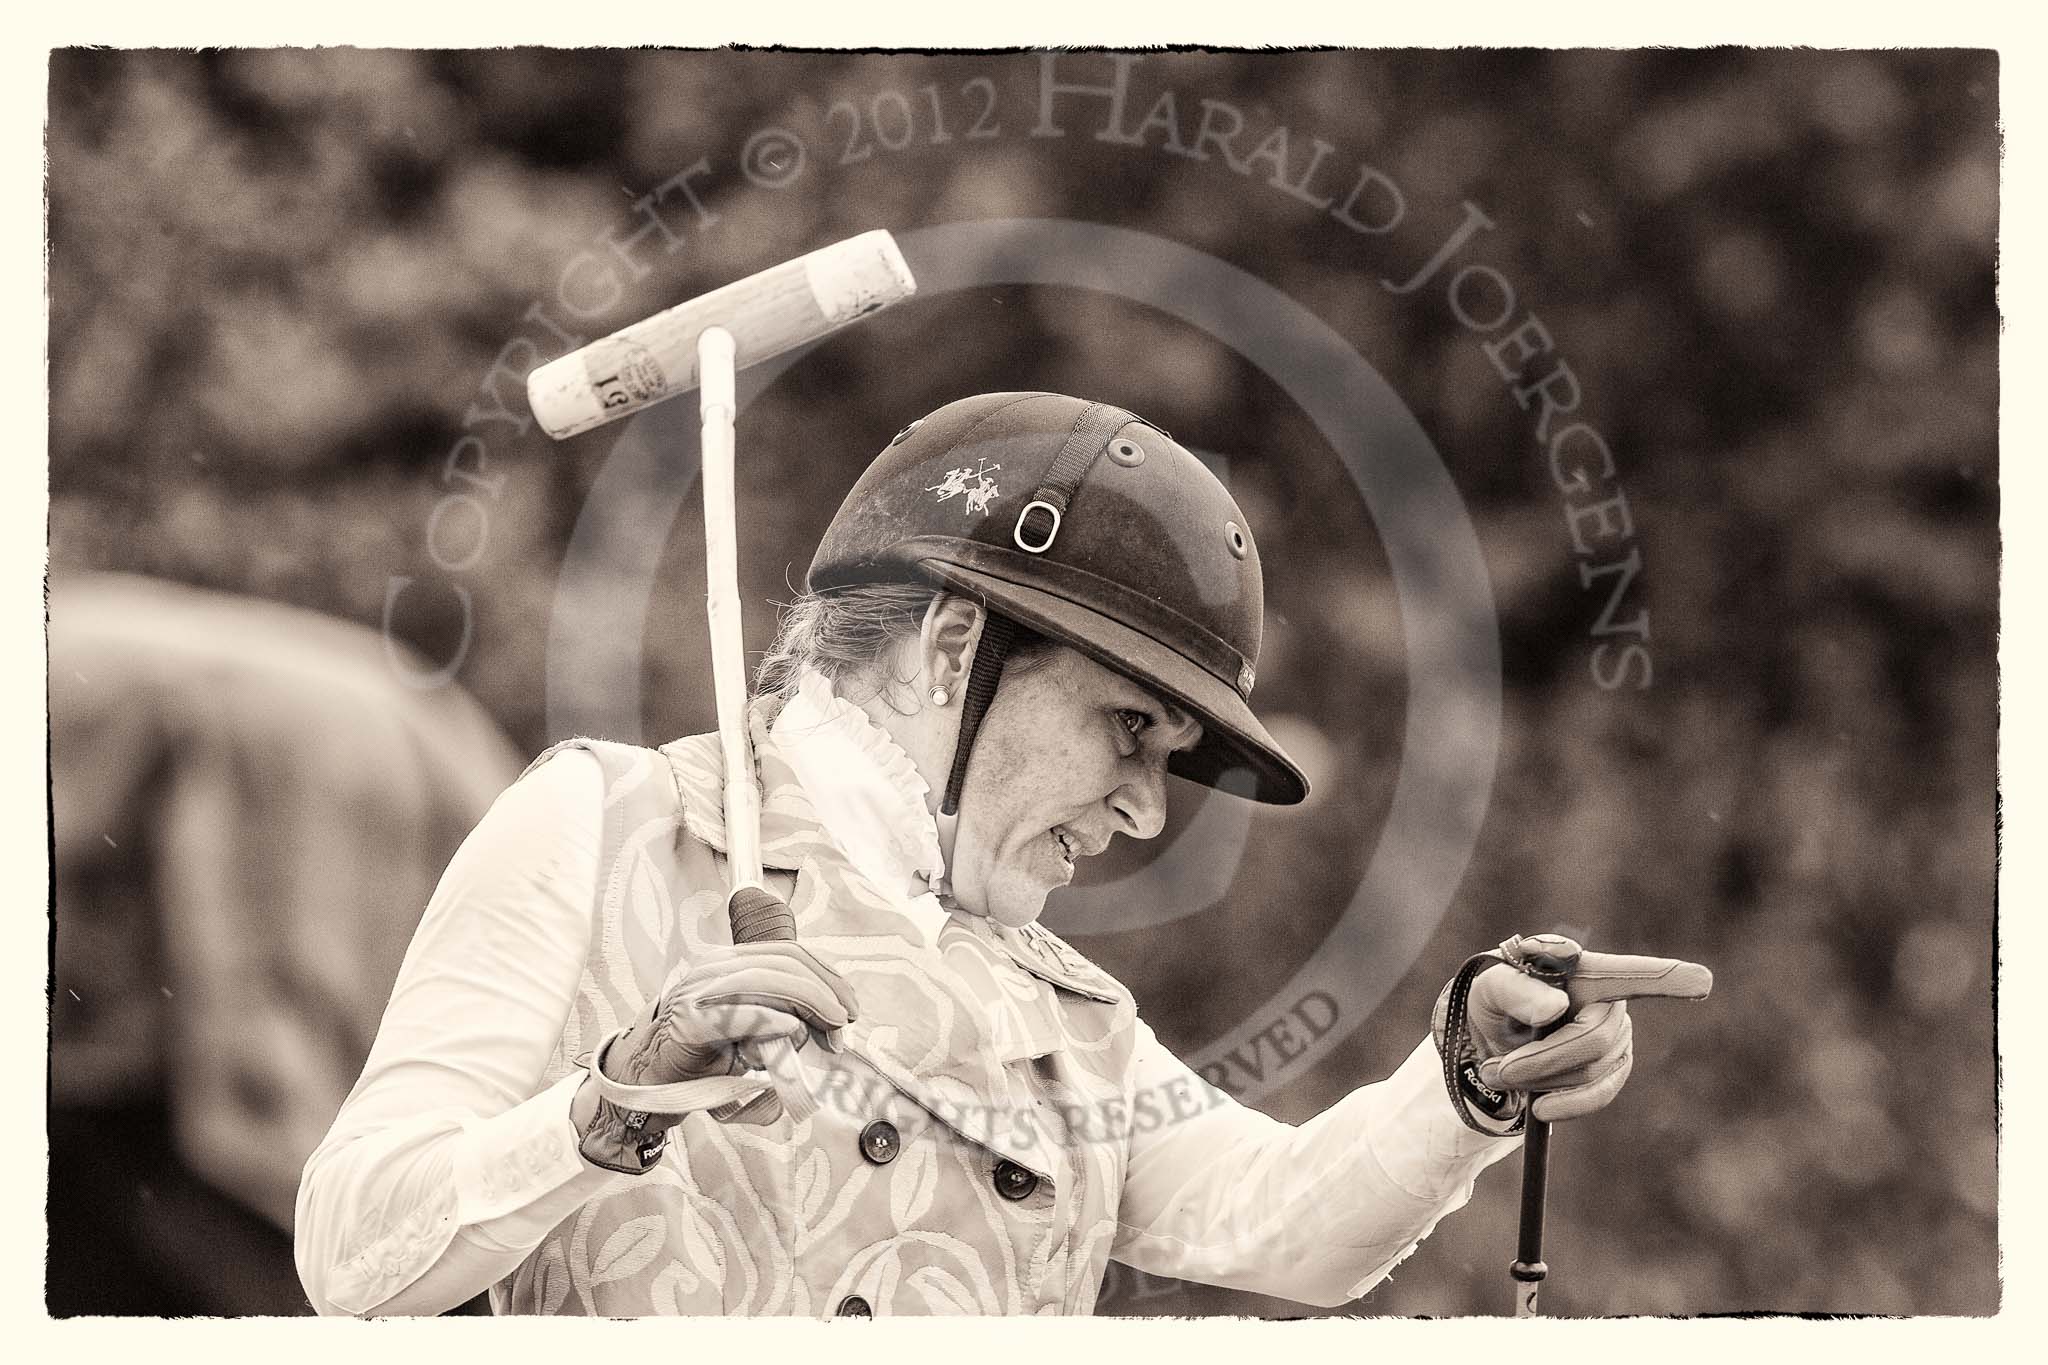 7th Heritage Polo Cup semi-finals: The Amzons of Polo sponsored by Polistas 
Barbara P Zingg pointing at her Pony for the next chukker..
Hurtwood Park Polo Club,
Ewhurst Green,
Surrey,
United Kingdom,
on 04 August 2012 at 13:21, image #131